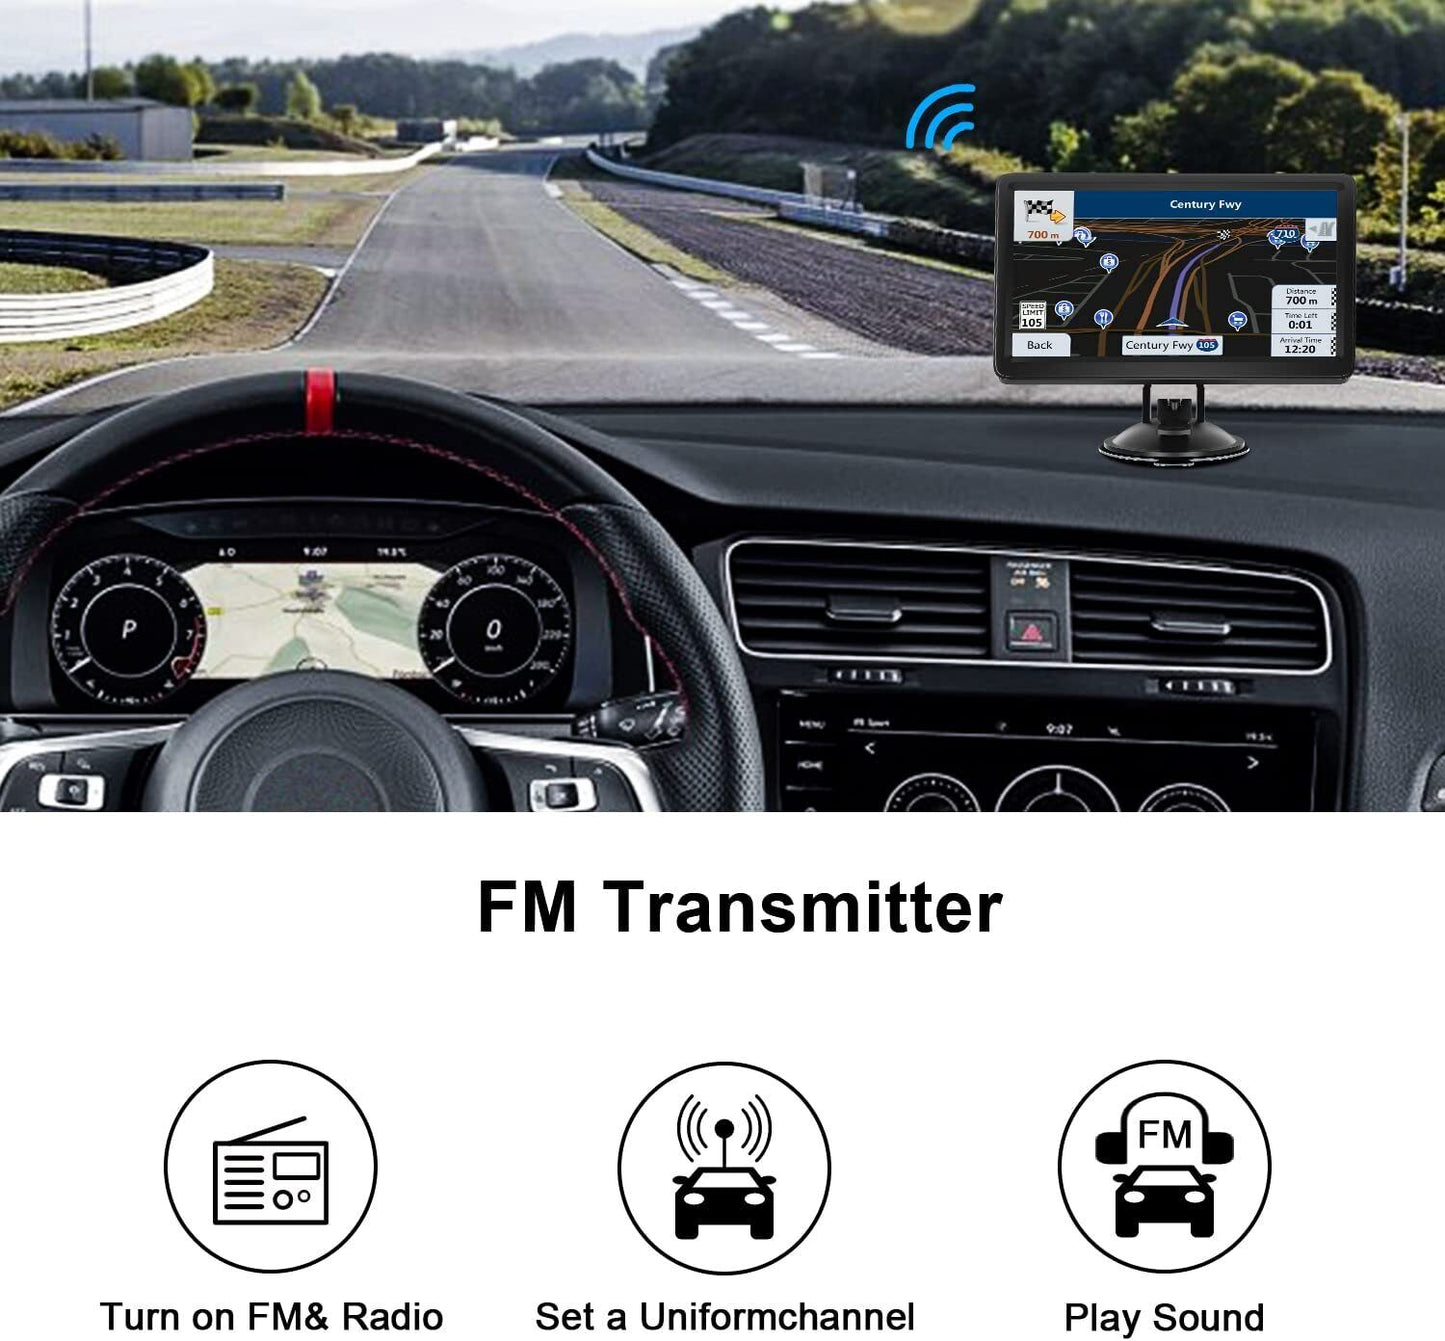 GPS Navigation System with 78 Canada+Mexico+US Maps and 256MB+8GB Memory for Cars and Trucks